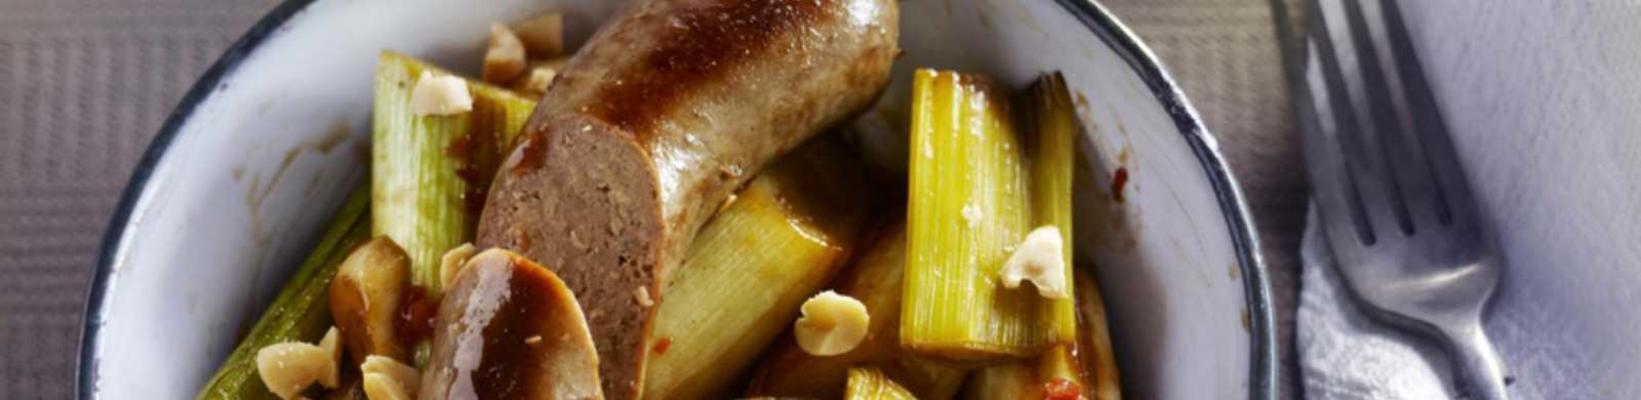 spicy leek dish with beef sausages